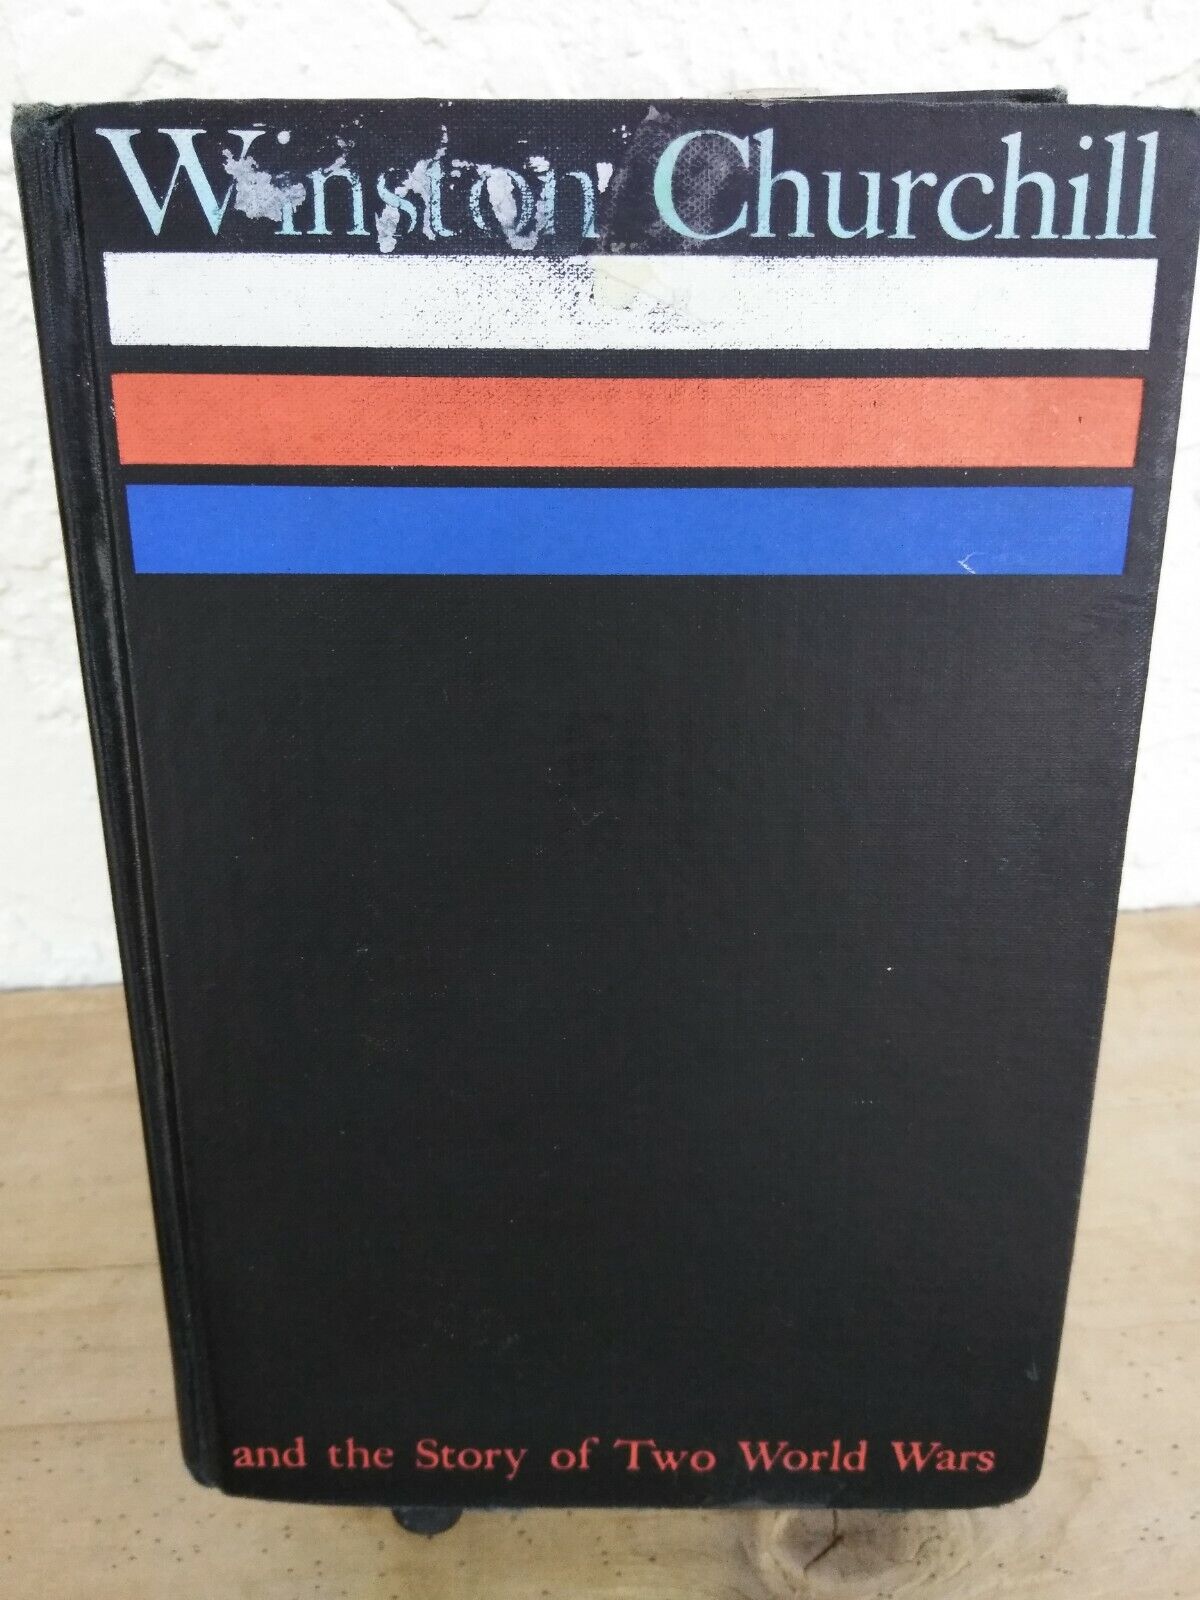 Winston Churchill and the Story of Two World Wars book Rare 